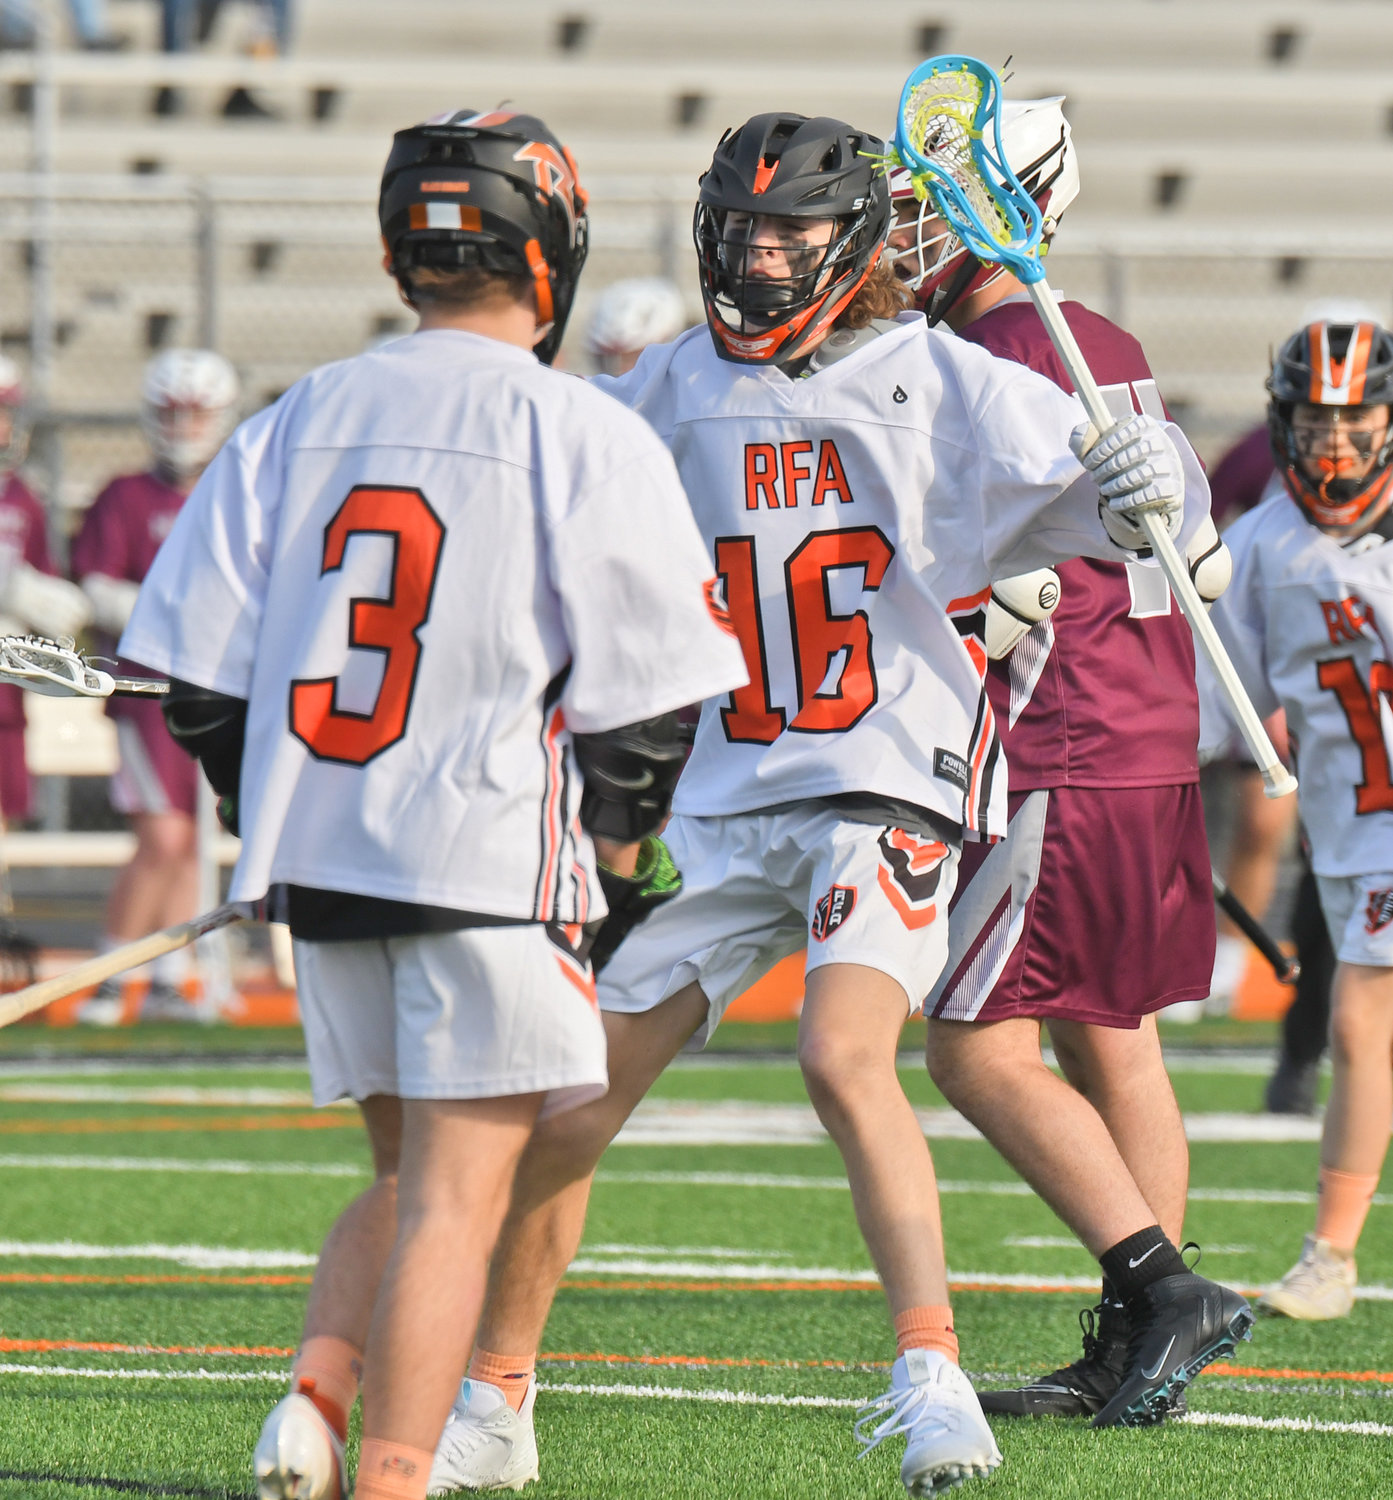 FIRST QUARTER GOAL — RFA's Logan Waterman, center, celebrates his first quarter goal with teammate Max Hunt in Tuesday's season opener at RFA Stadium. The Black Knights lost 12-10.